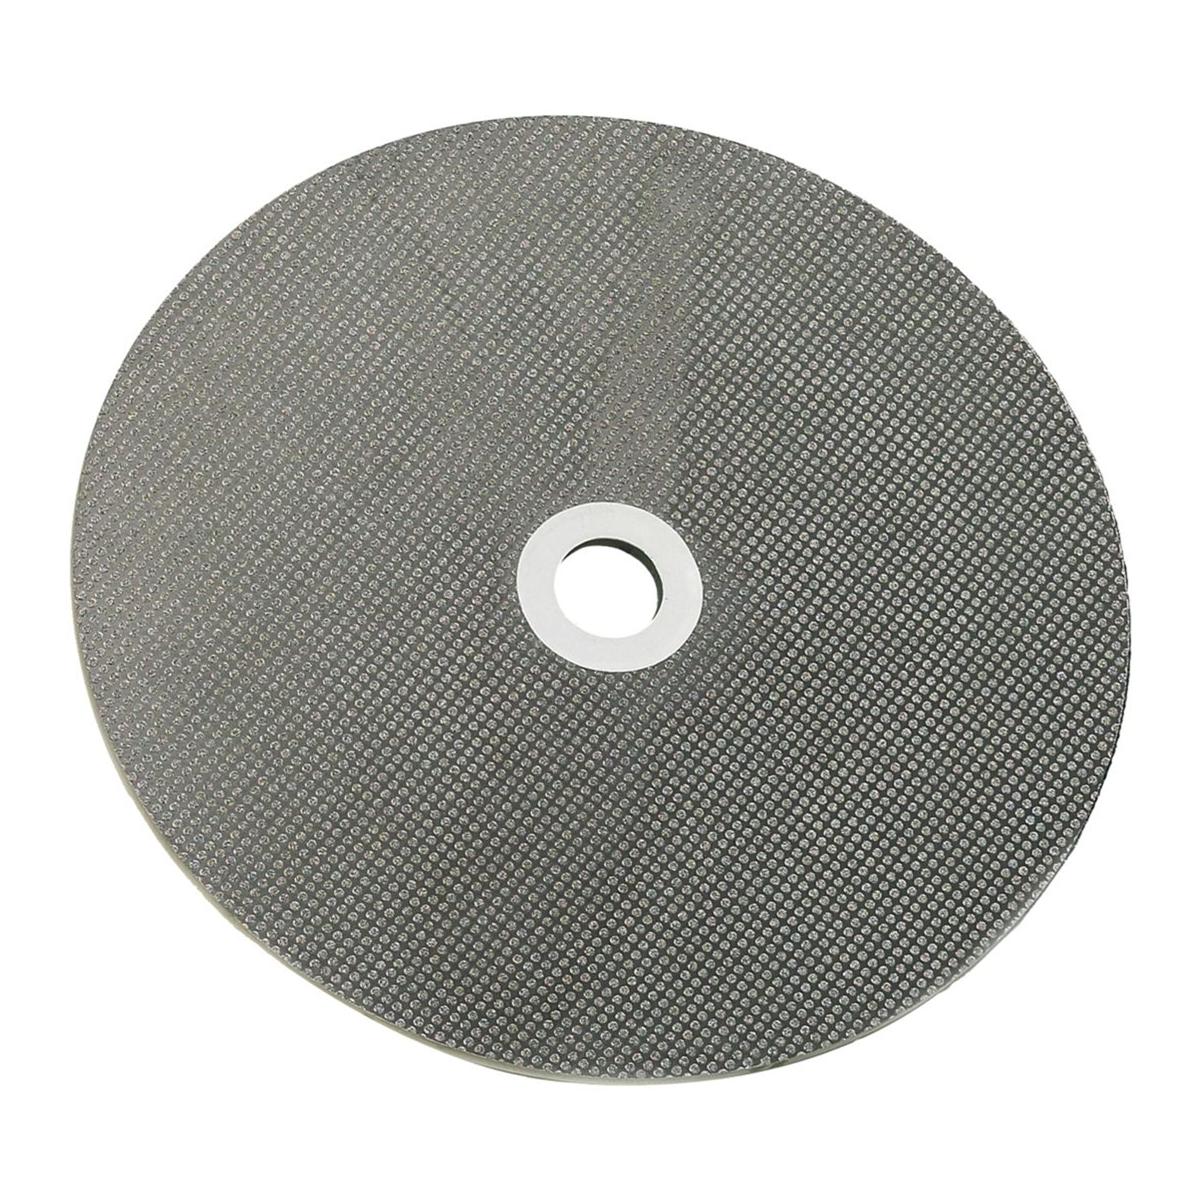 Diamond Coated Trimmer Disk